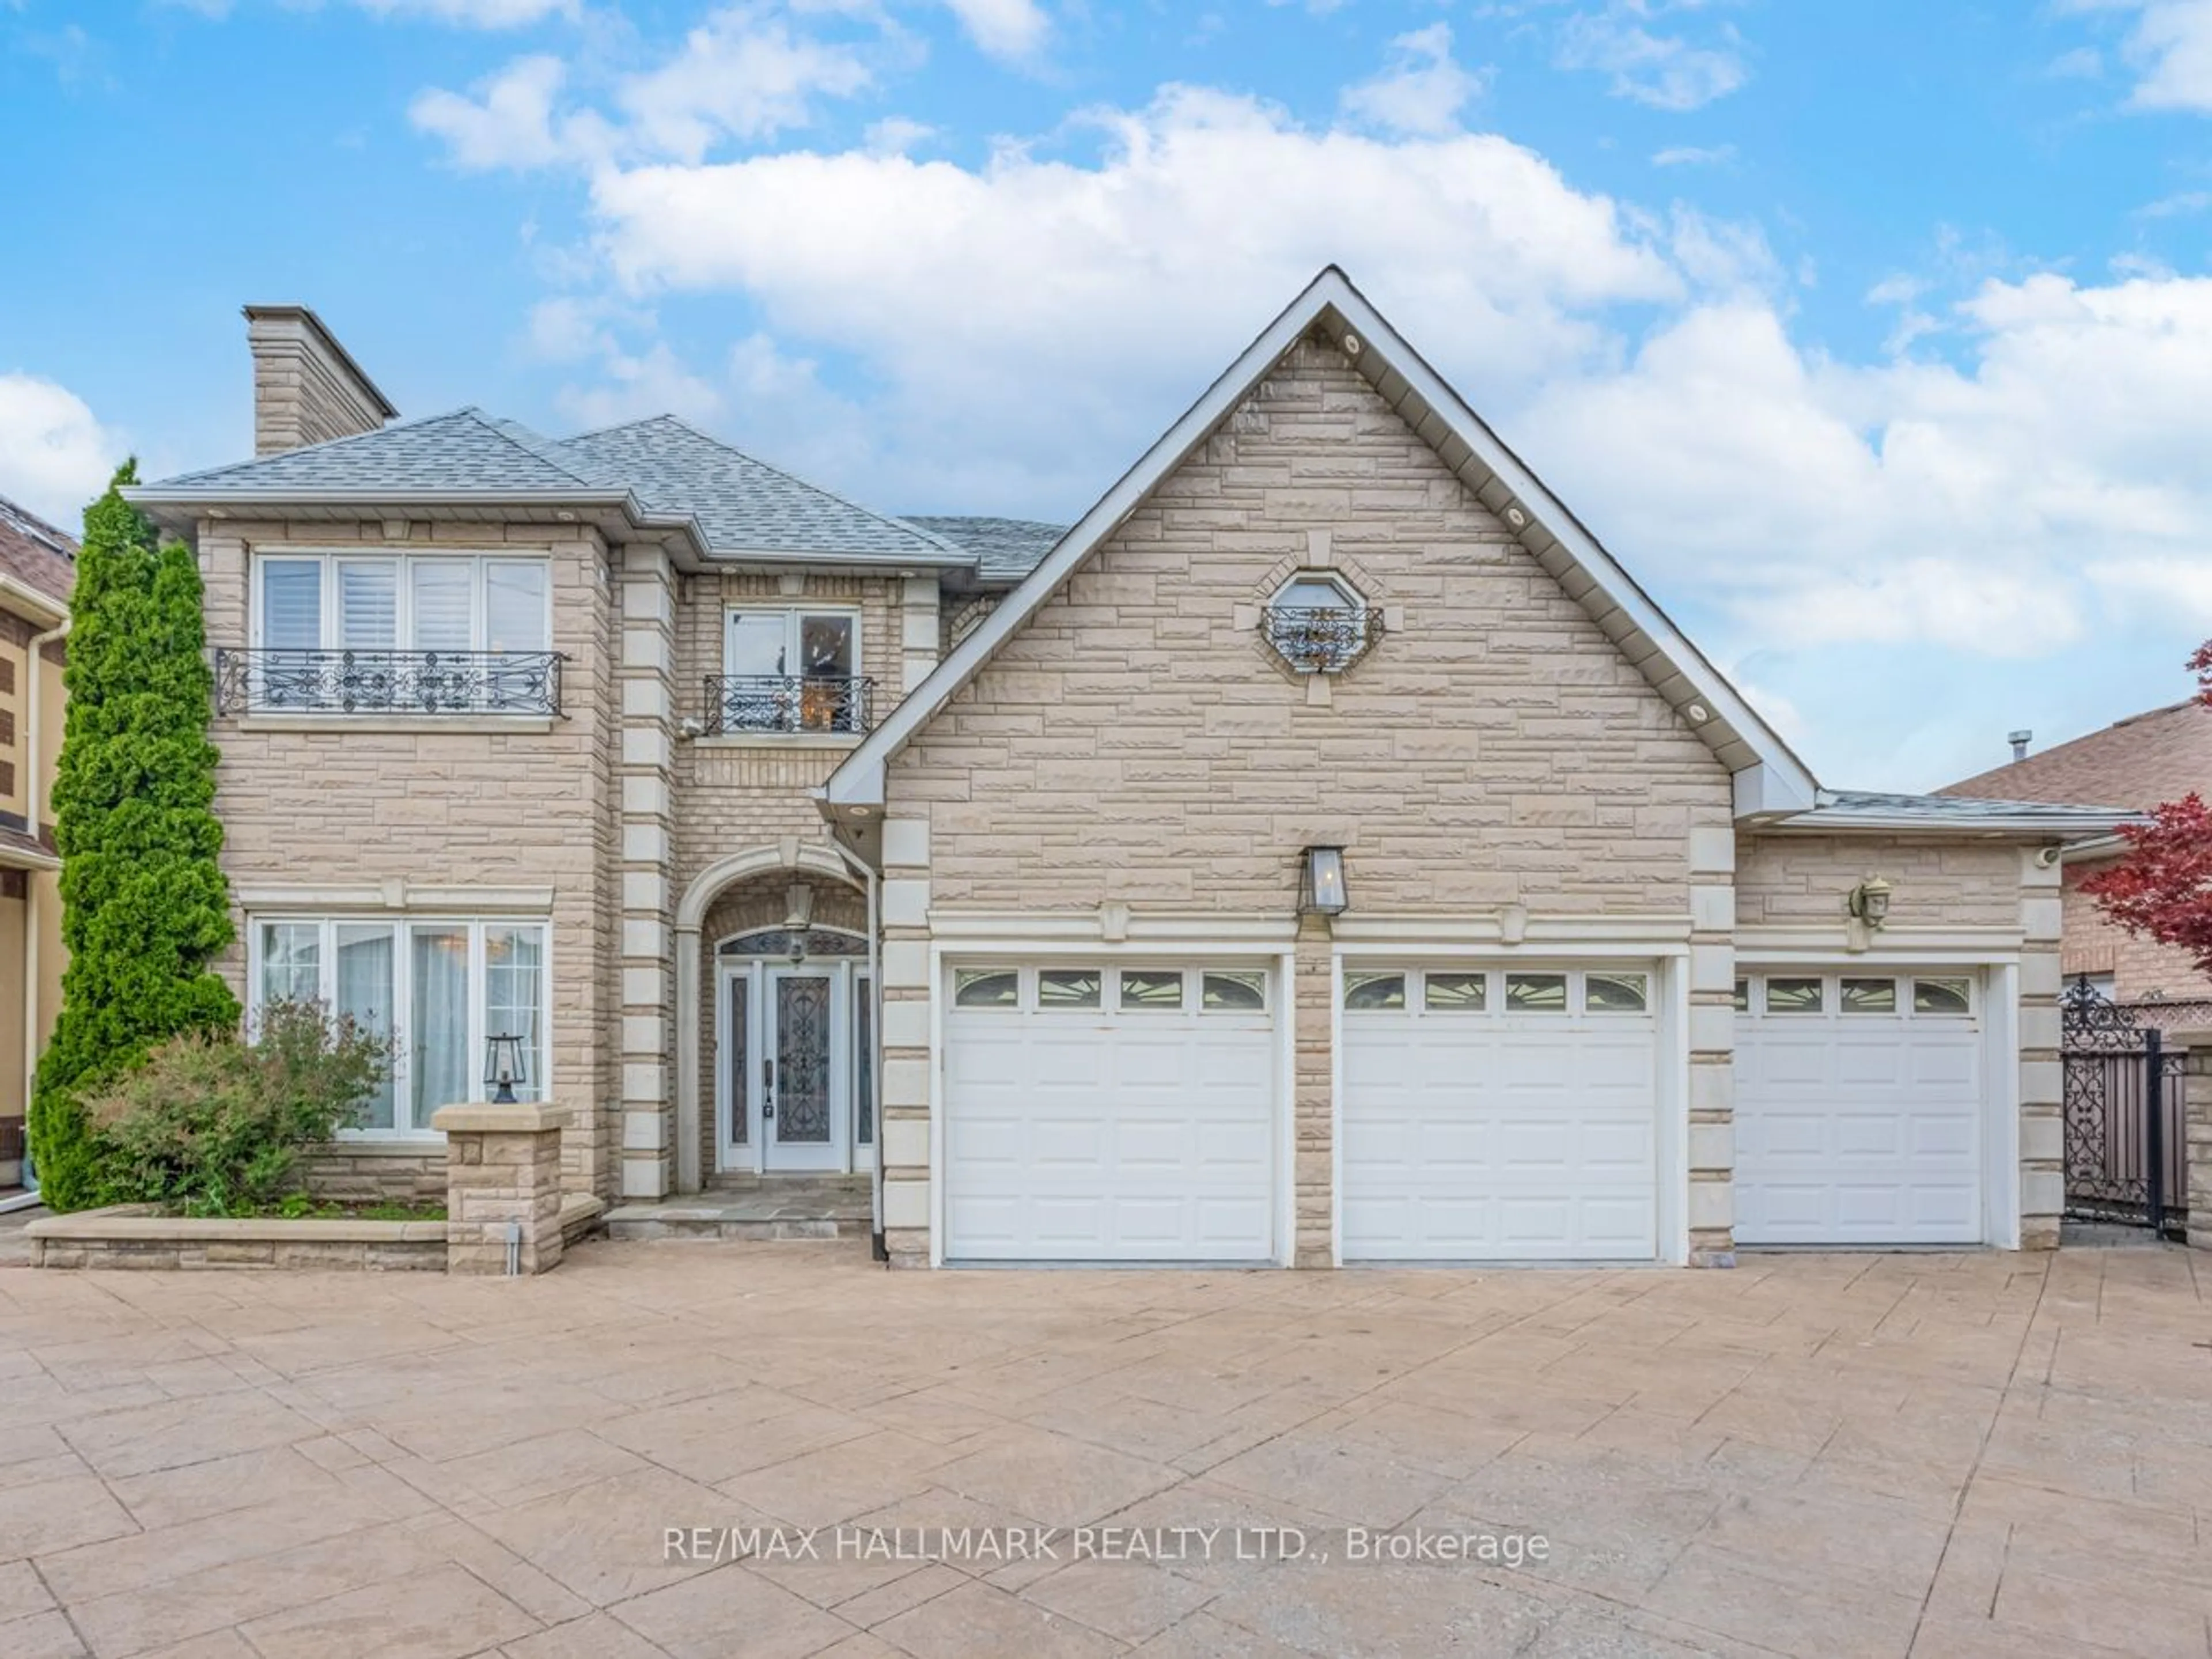 Home with stone exterior material for 138 Elgin Mills Rd, Richmond Hill Ontario L4C 4M2